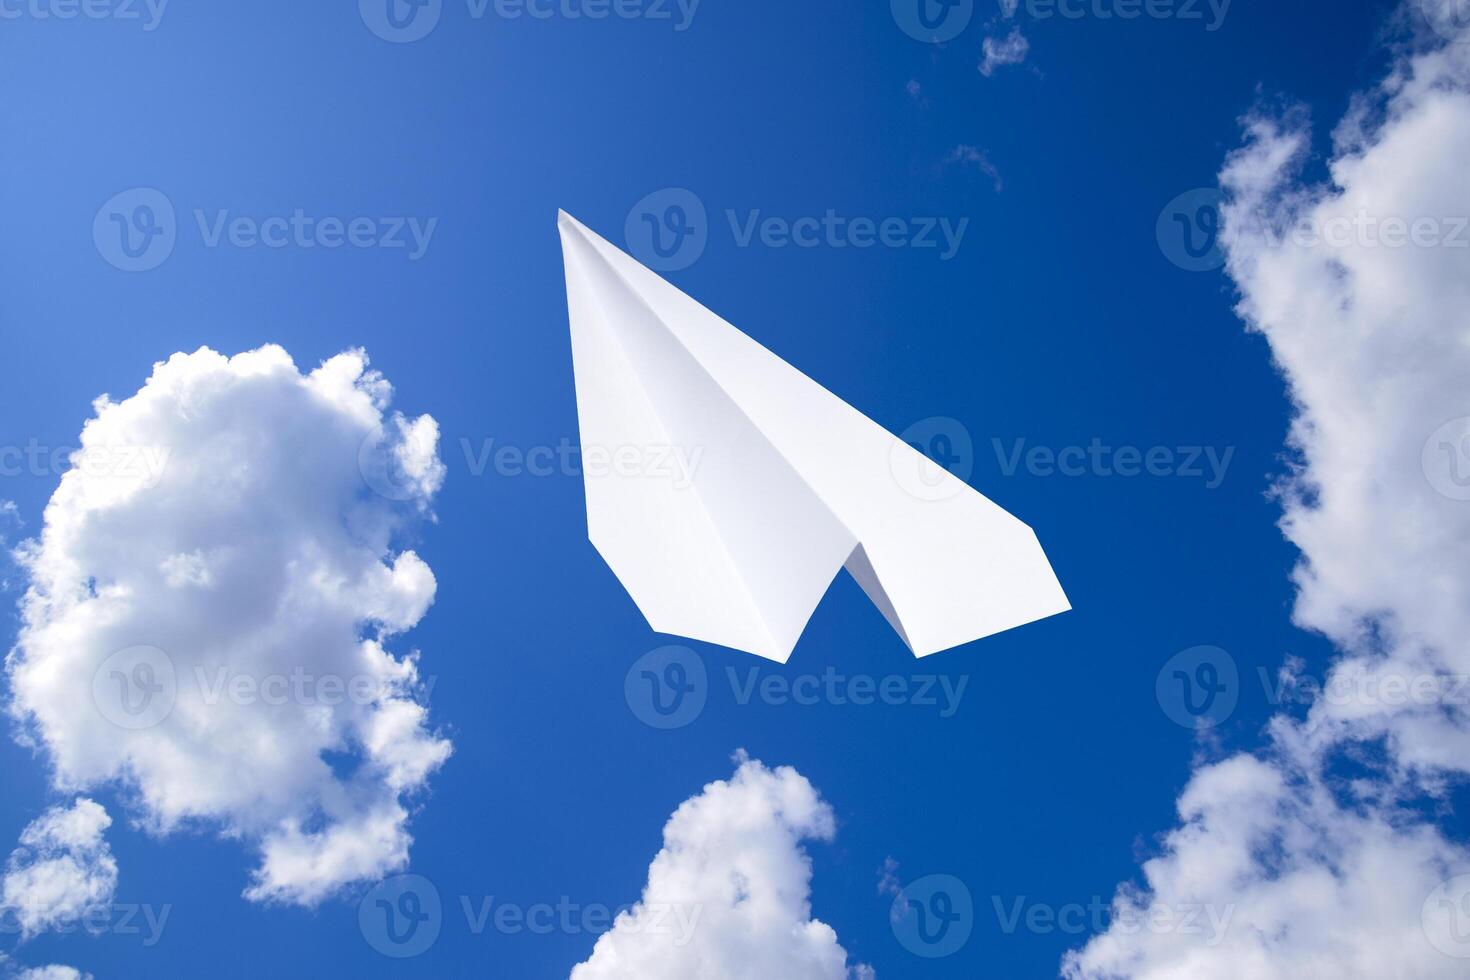 White paper airplane in a blue sky with clouds. The message symbol in the messenger photo